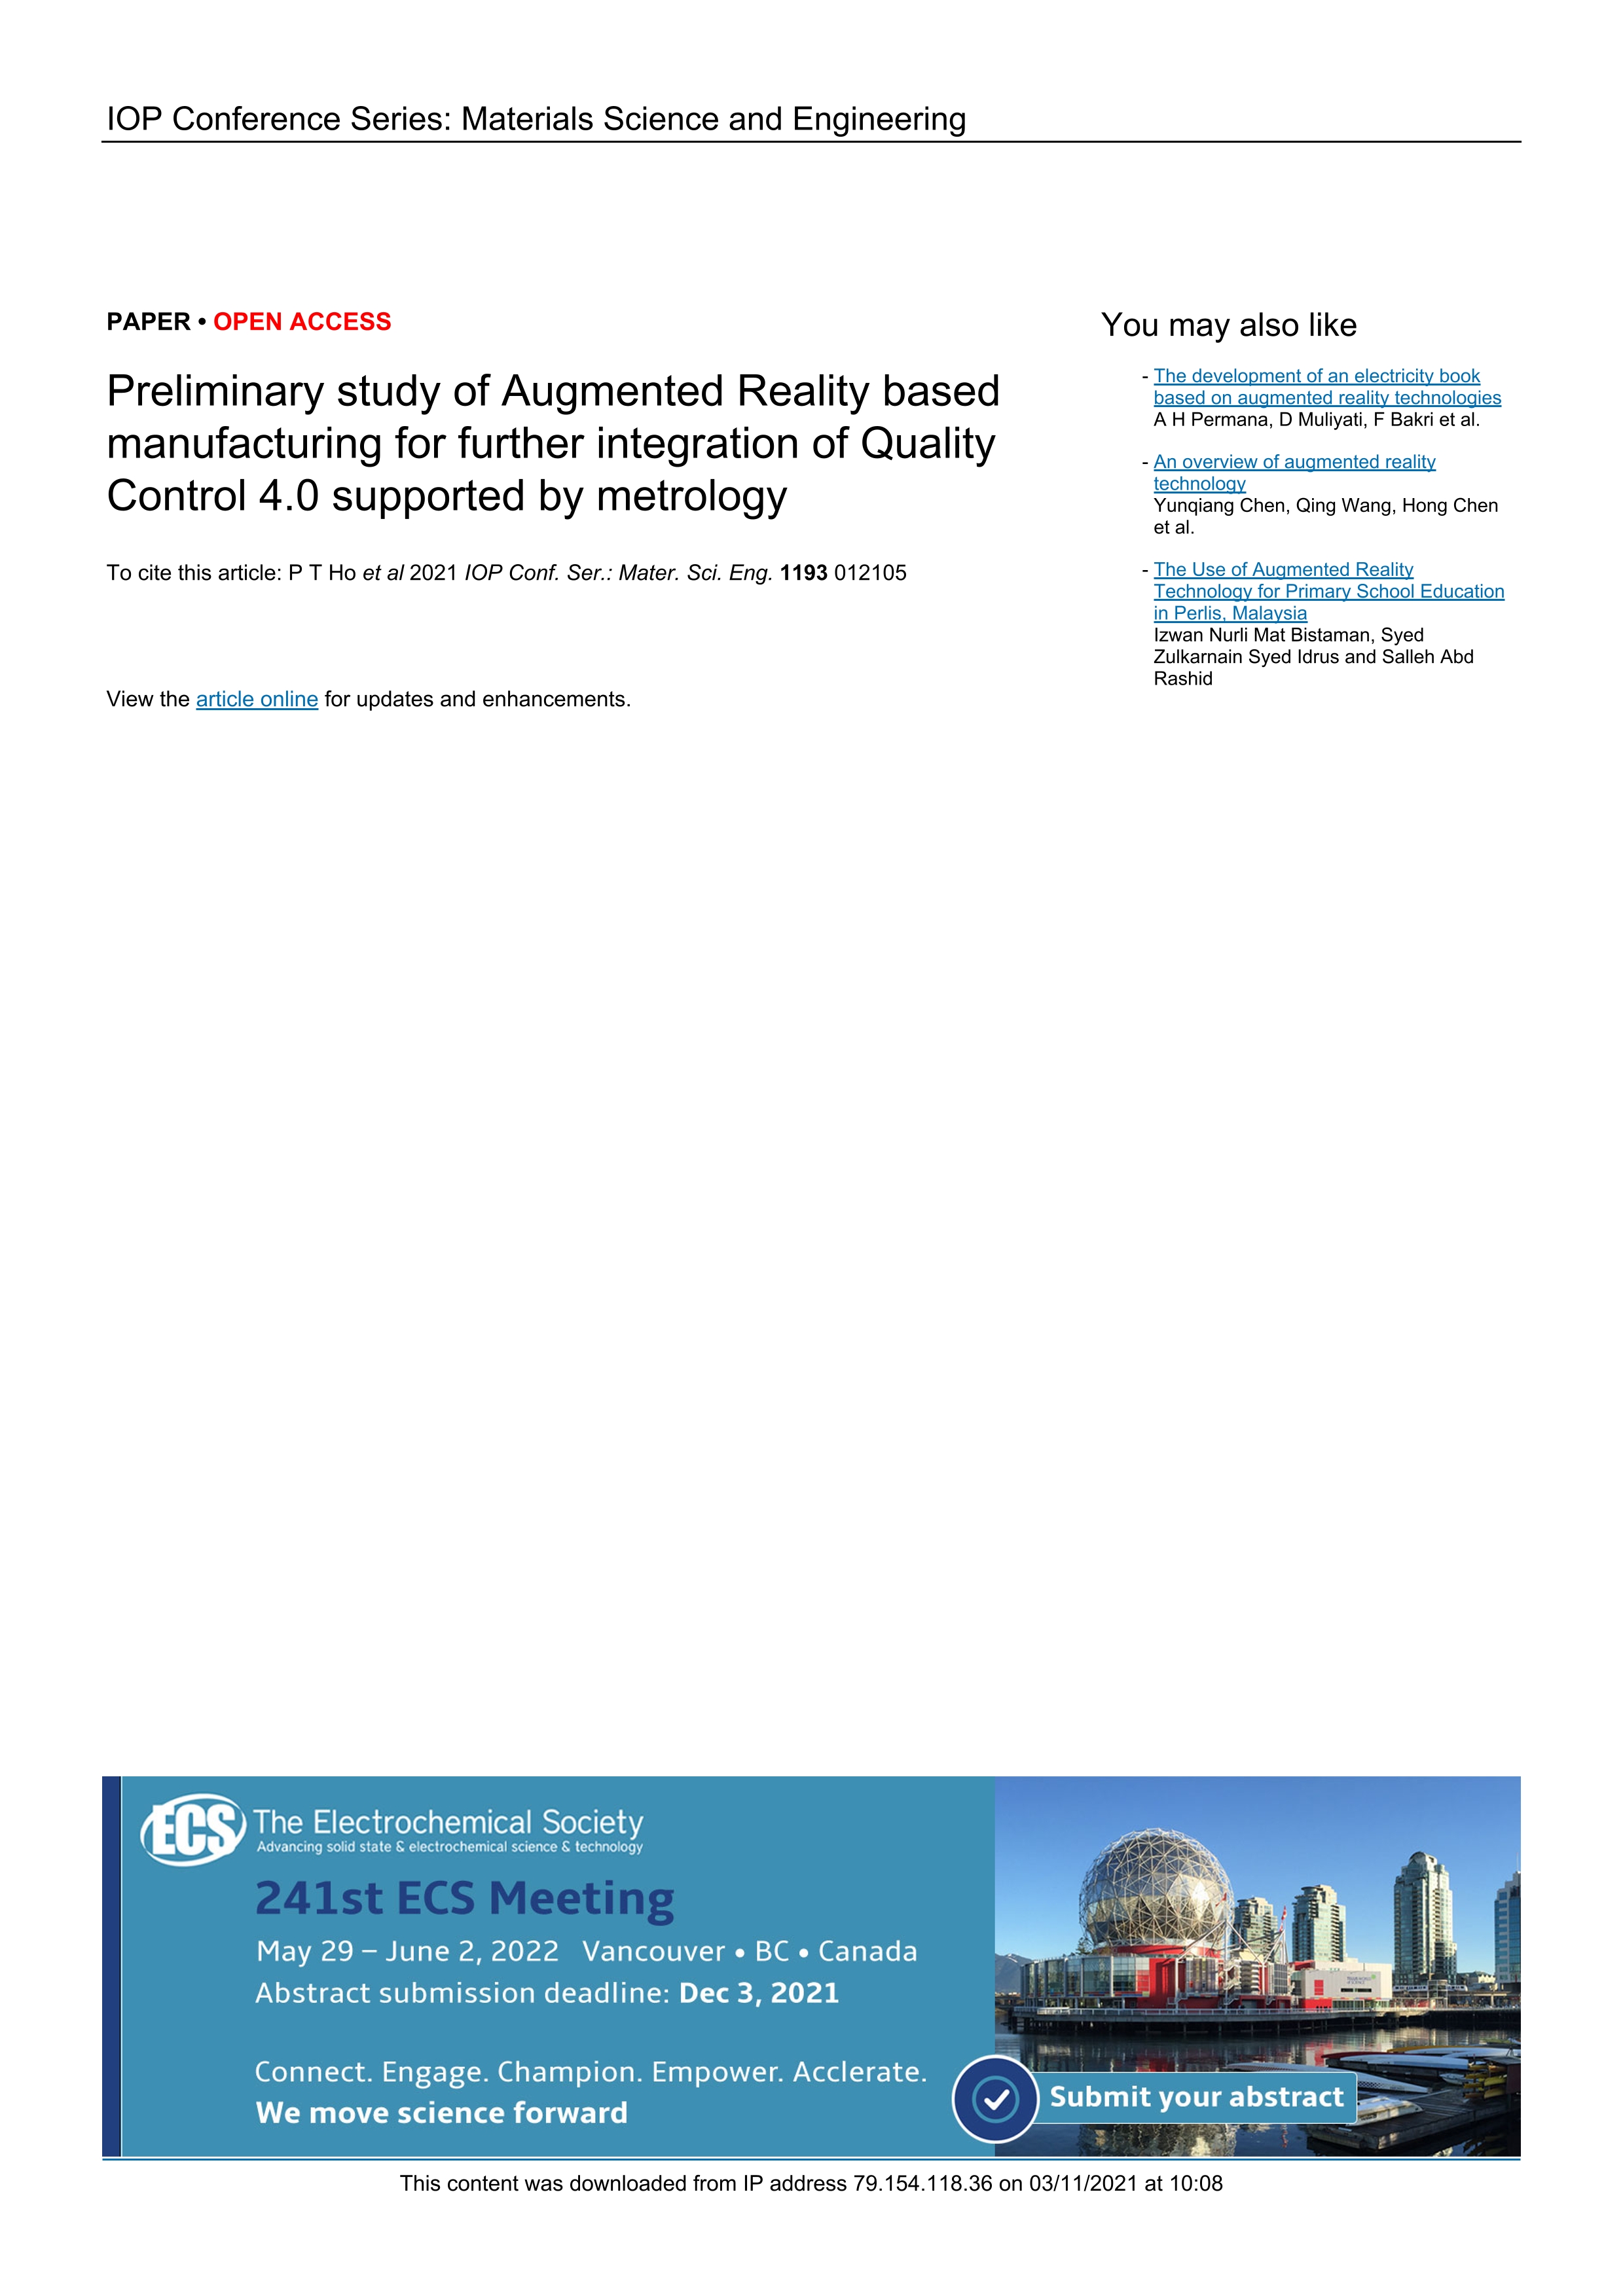 Preliminary study of Augmented Reality based manufacturing for further integration of Quality Control 4.0 supported by metrology